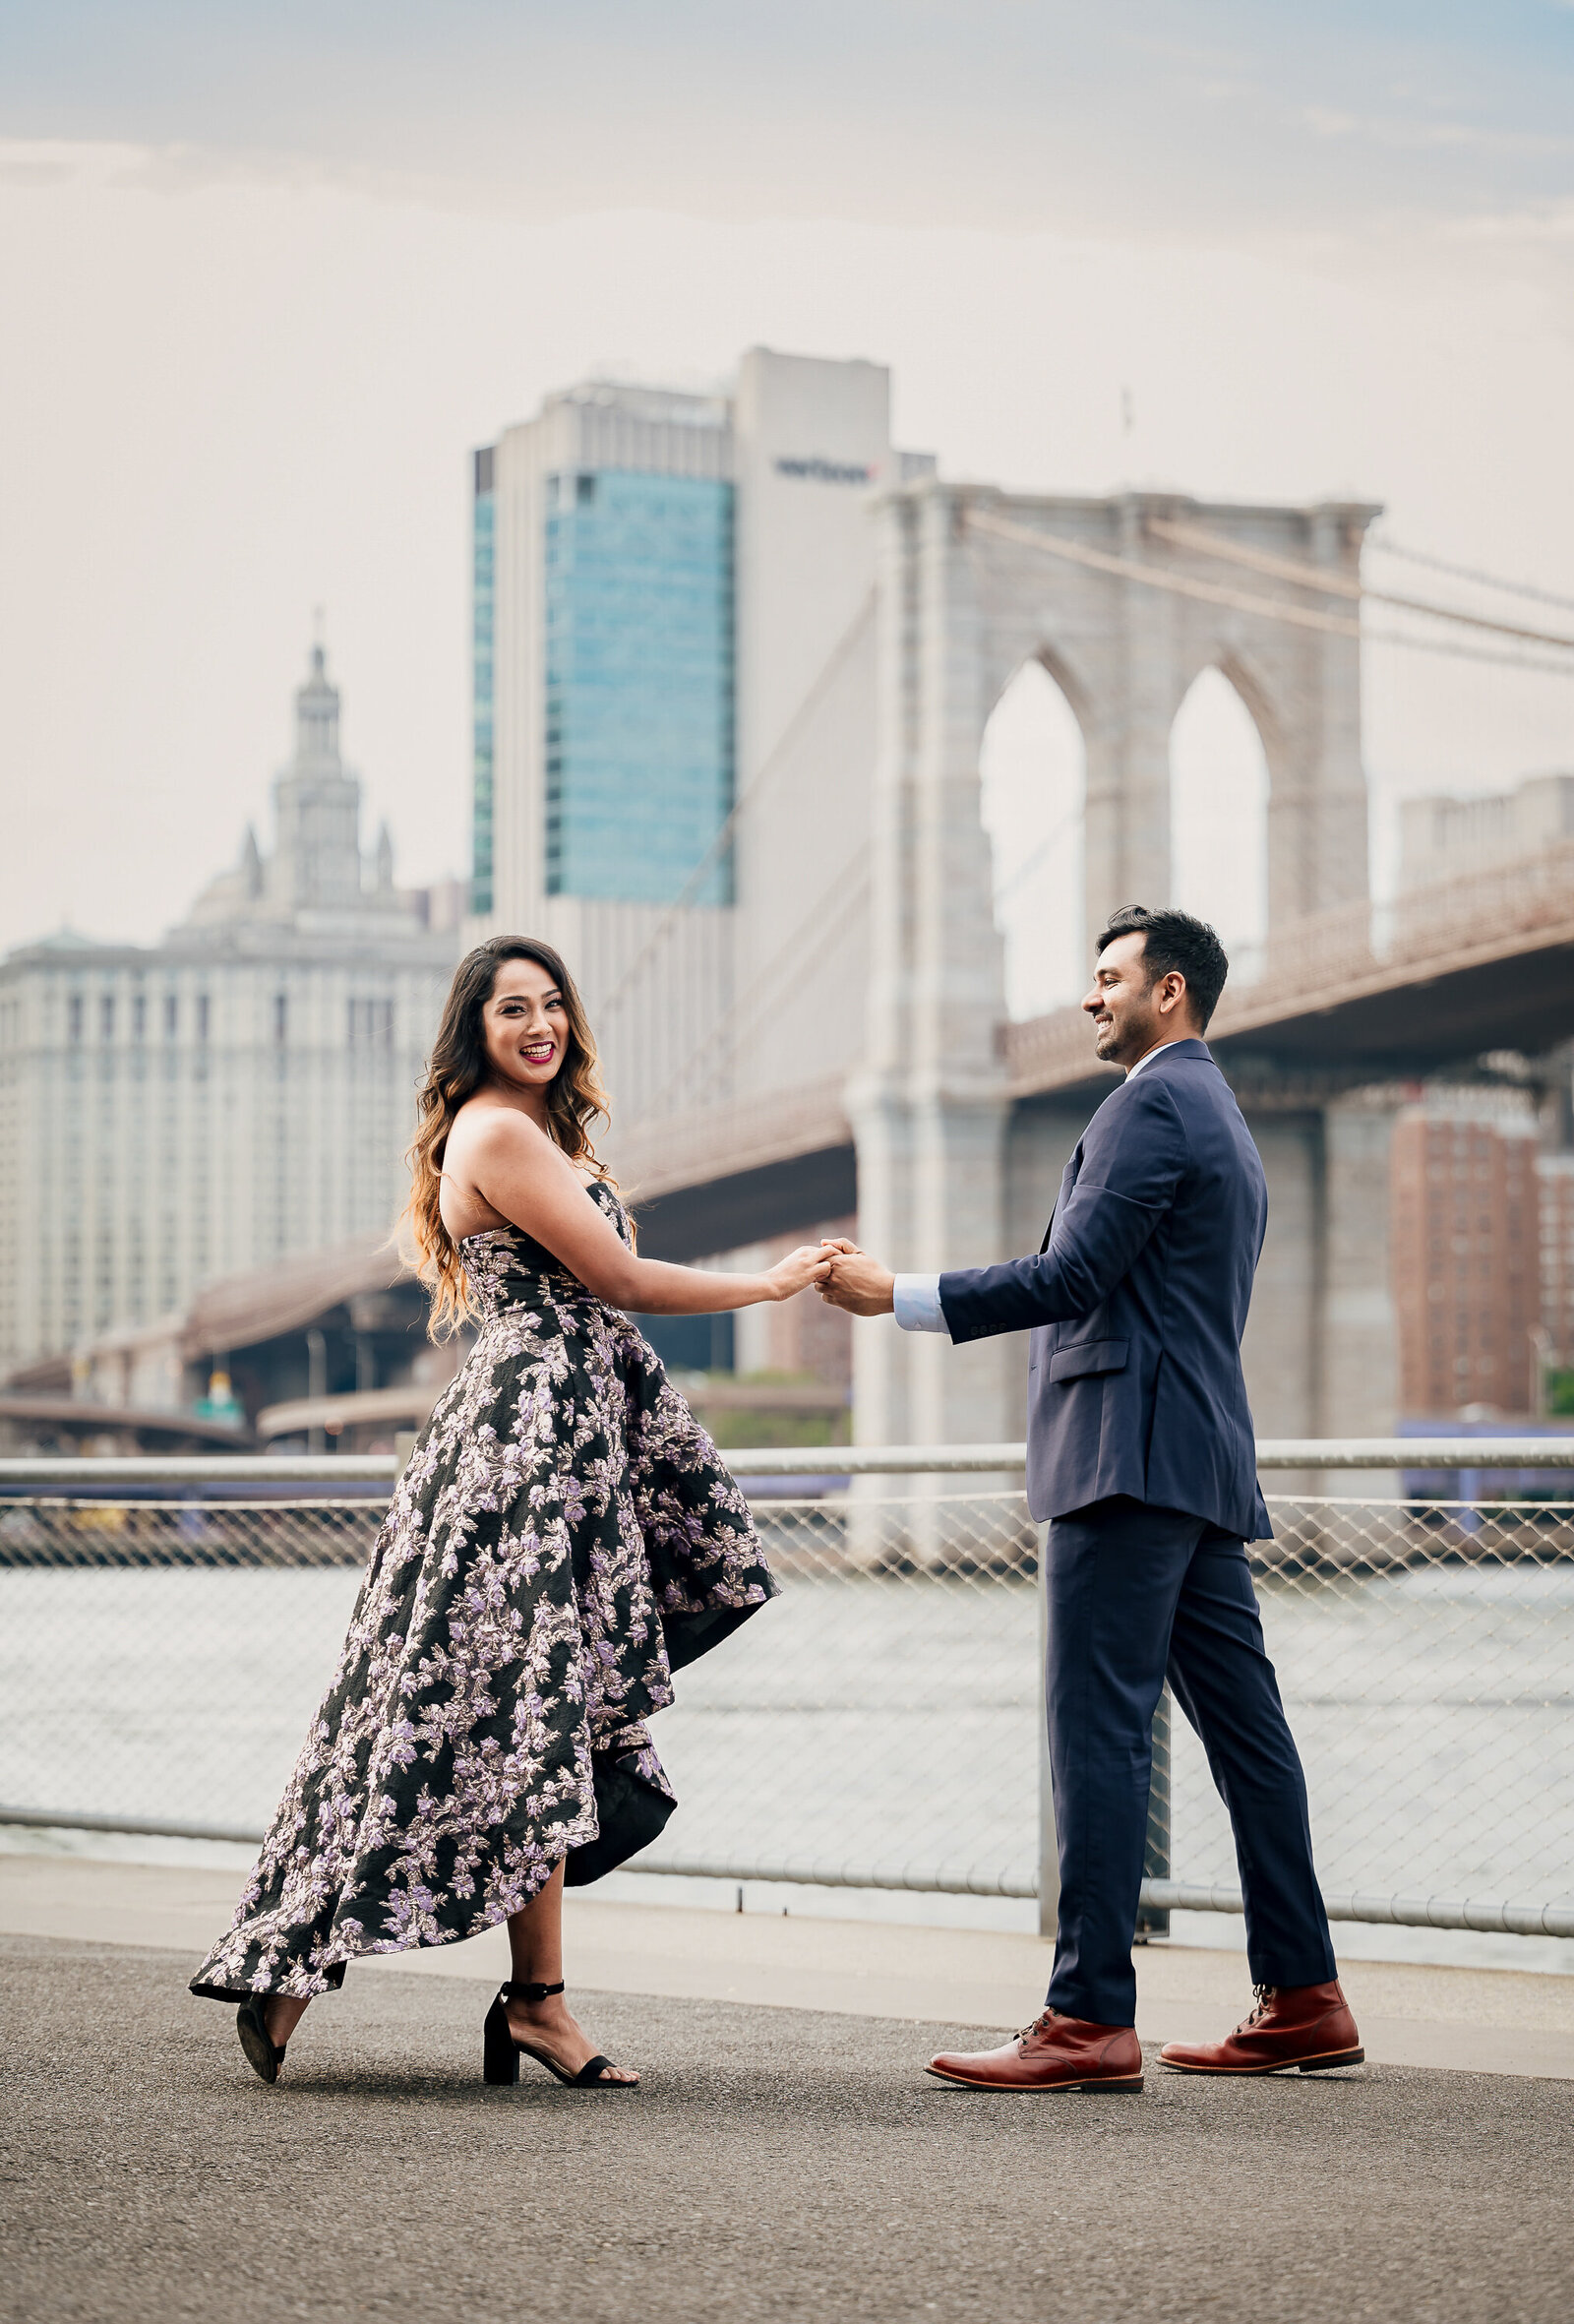 Capture your Indian engagement photography in NJ with Ishan Fotografi.